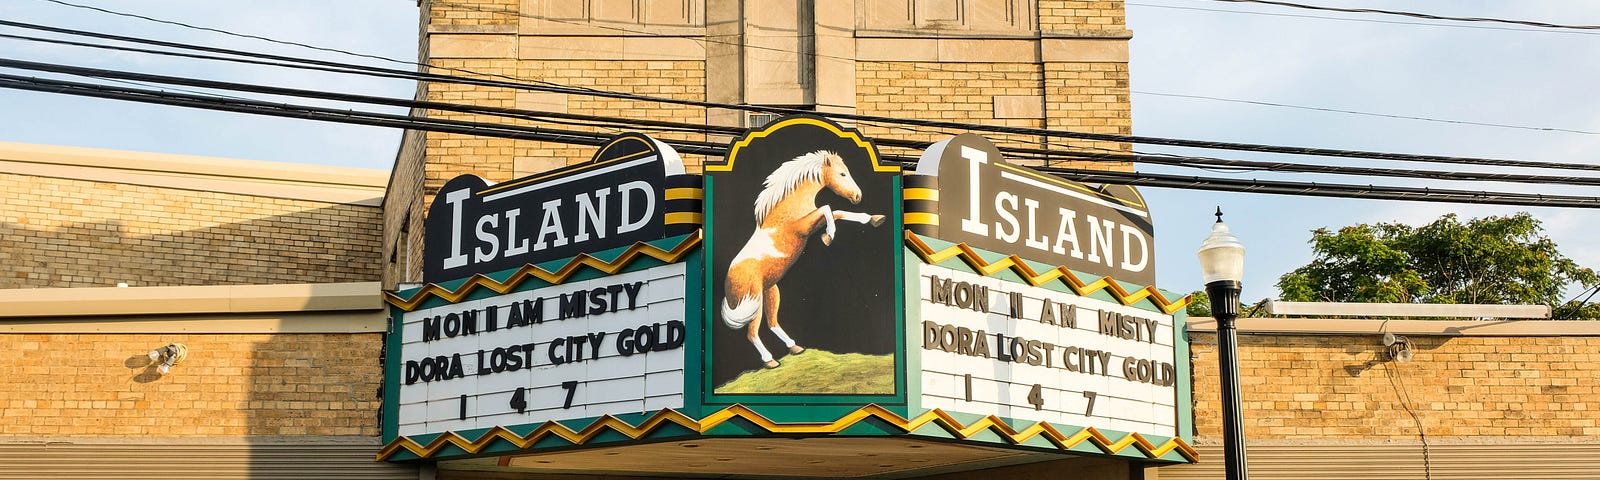 The Island, an old fashion movie house marquee touting a movie, once a scene for hoards of kids on Saturday mornings.